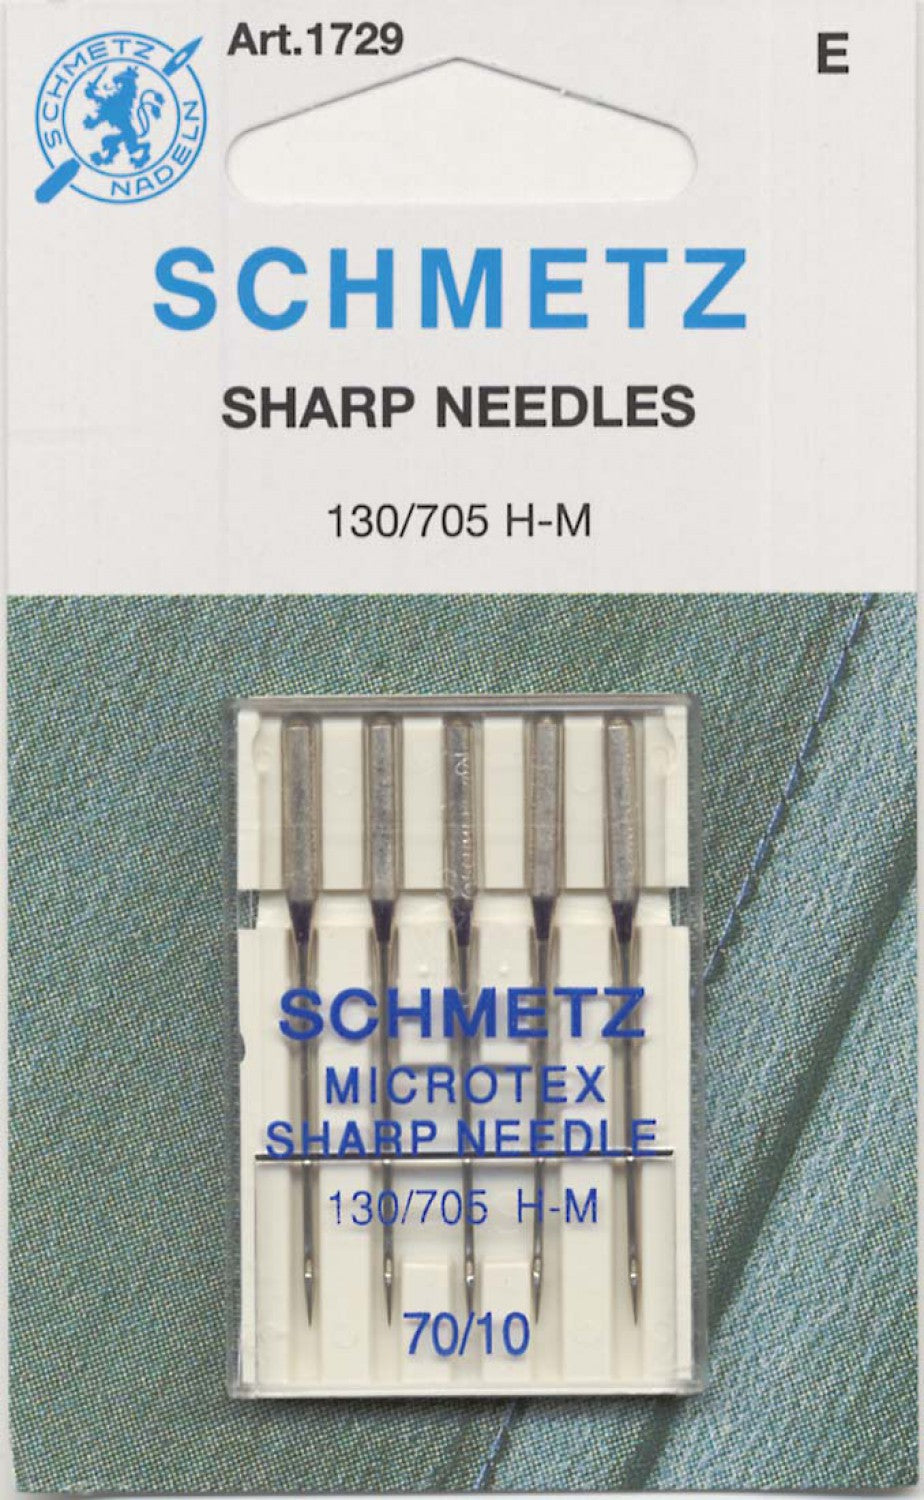 Schmetz MIcrotex Needle - 70/10 - 1 Package of 5 Needles